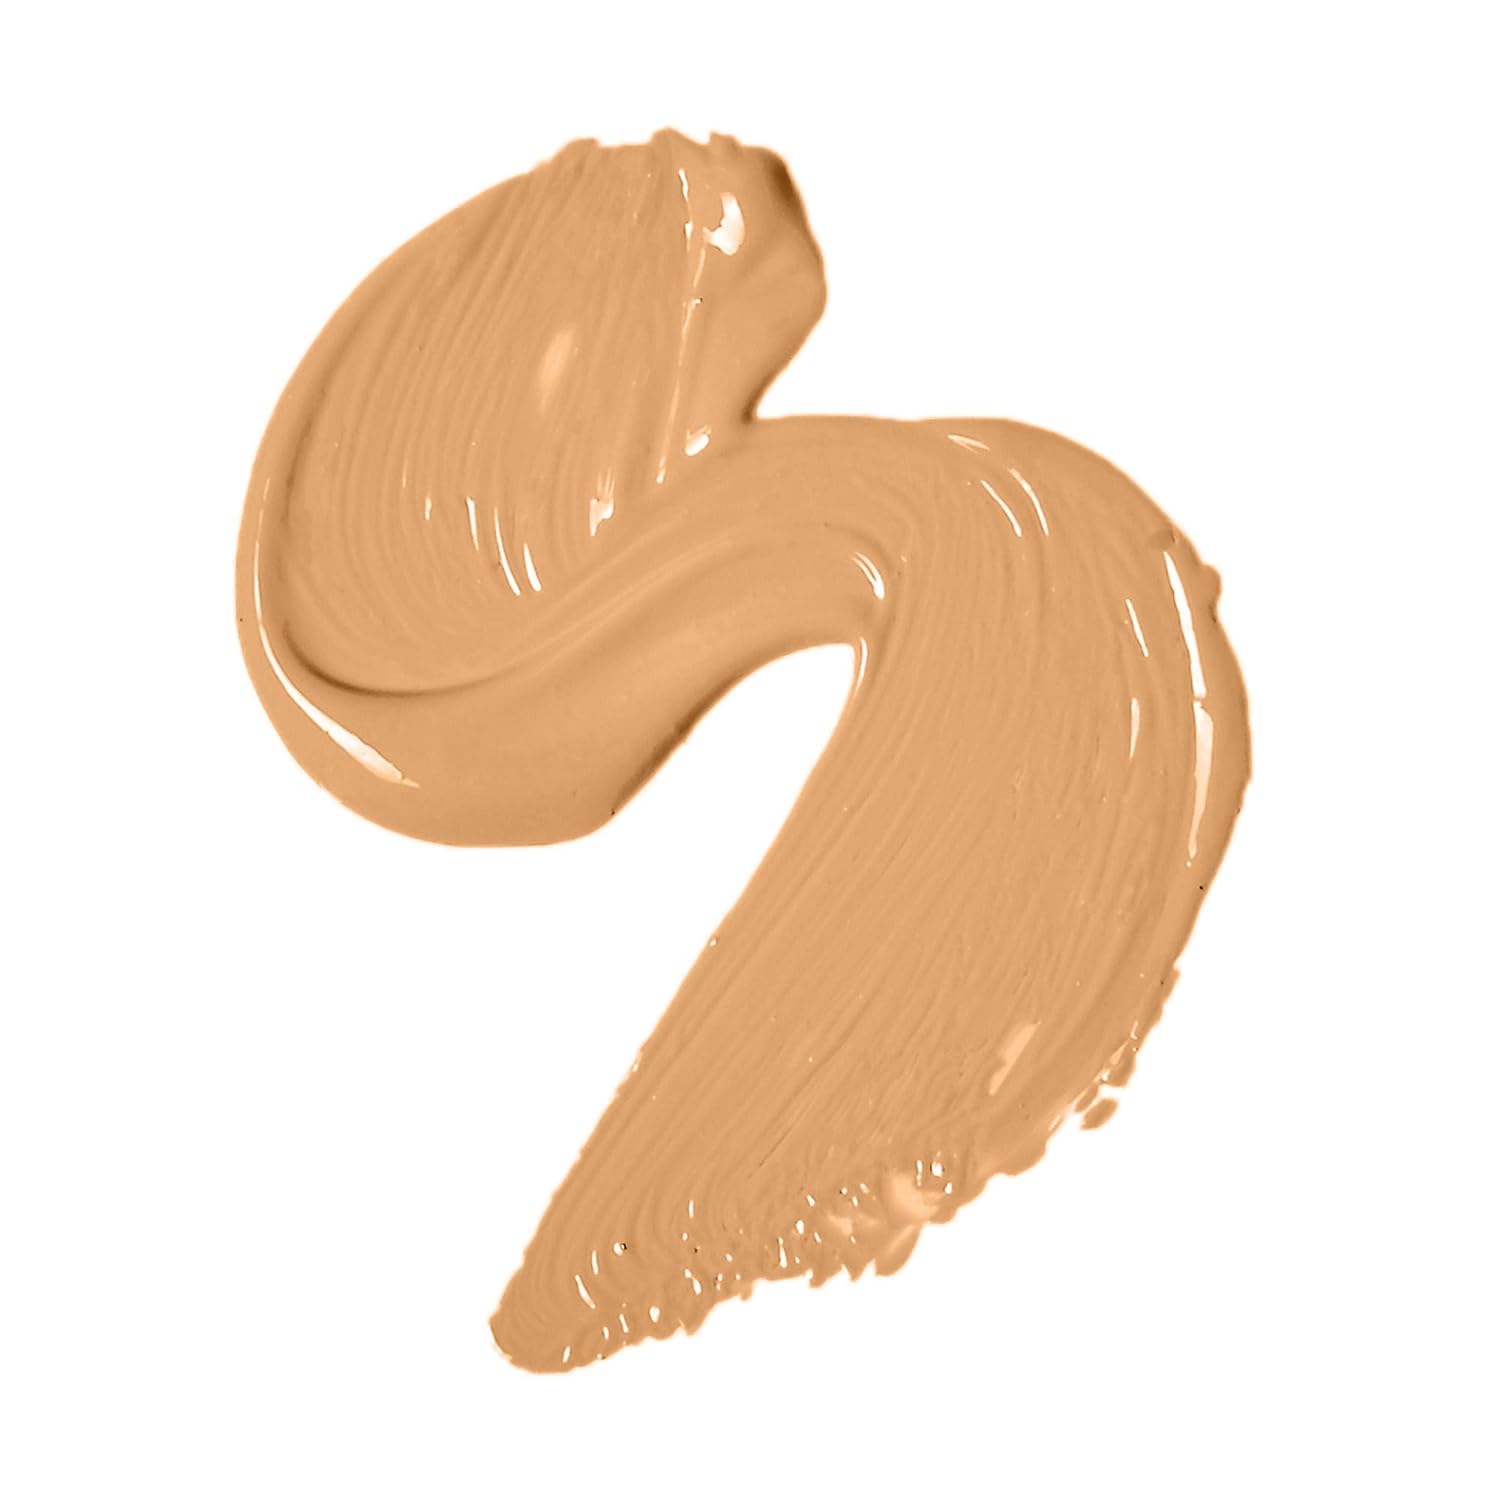 e.l.f. 16HR Camo Concealer, Full Coverage, Highly Pigmented 